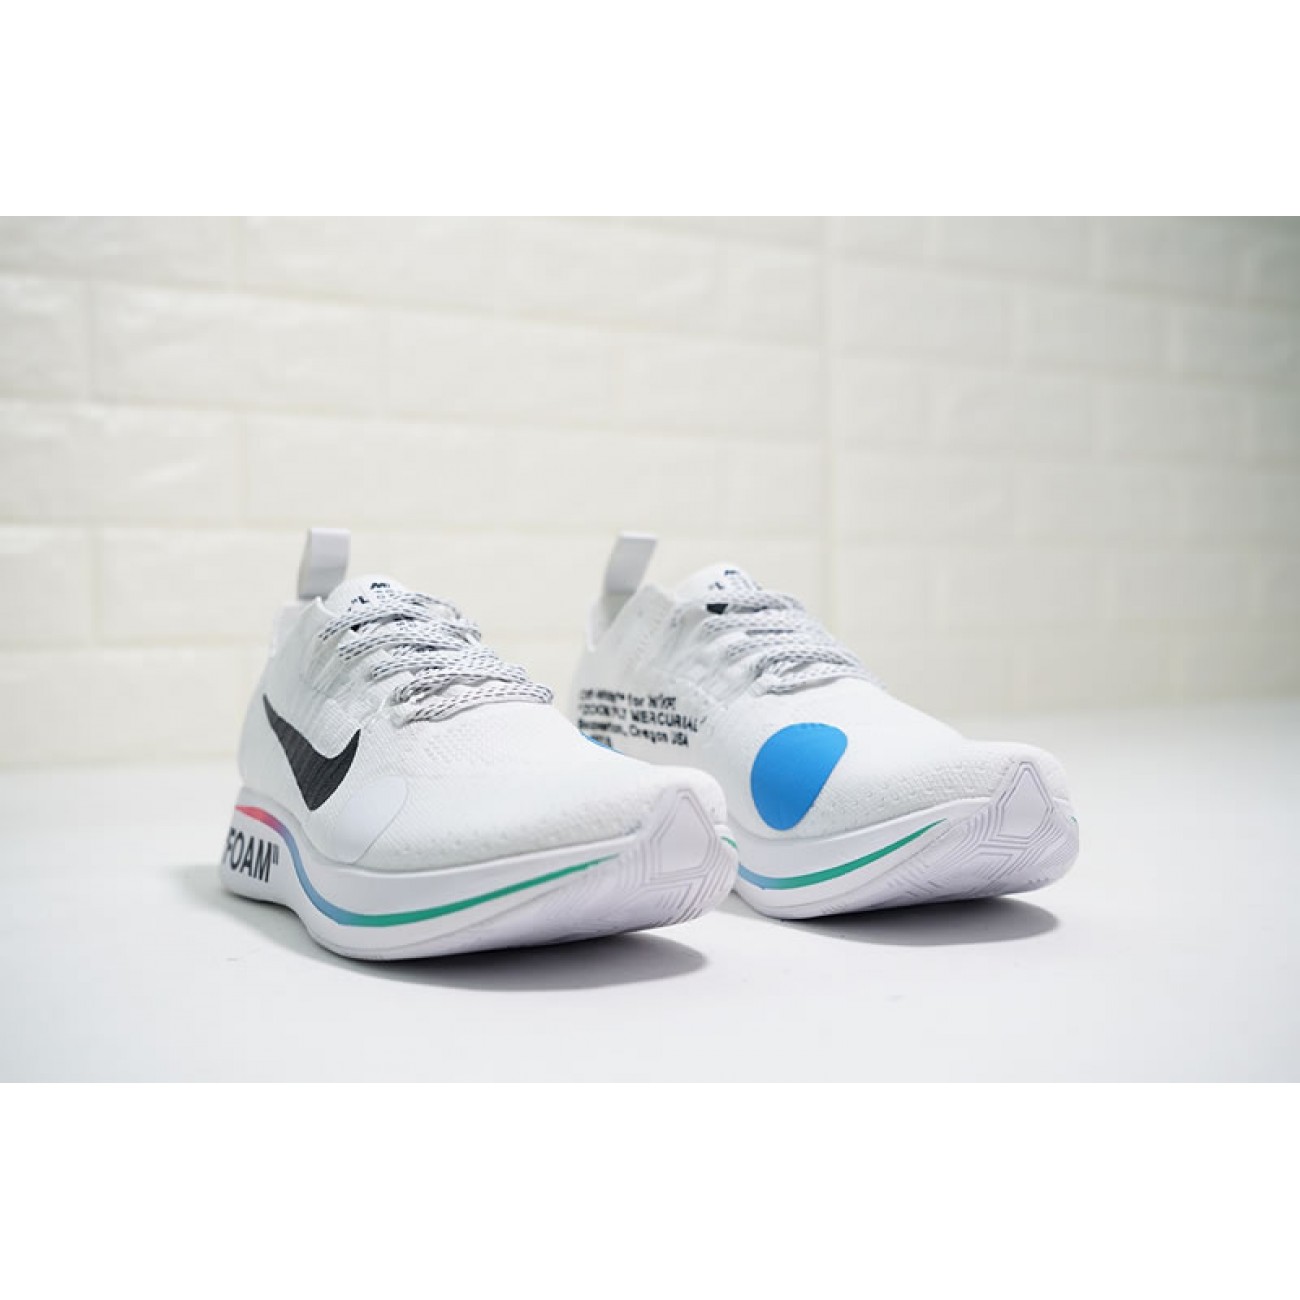 Off-White x Nike Zoom Fly Mercurial Flyknit White World Cup 2018 AO2115-100